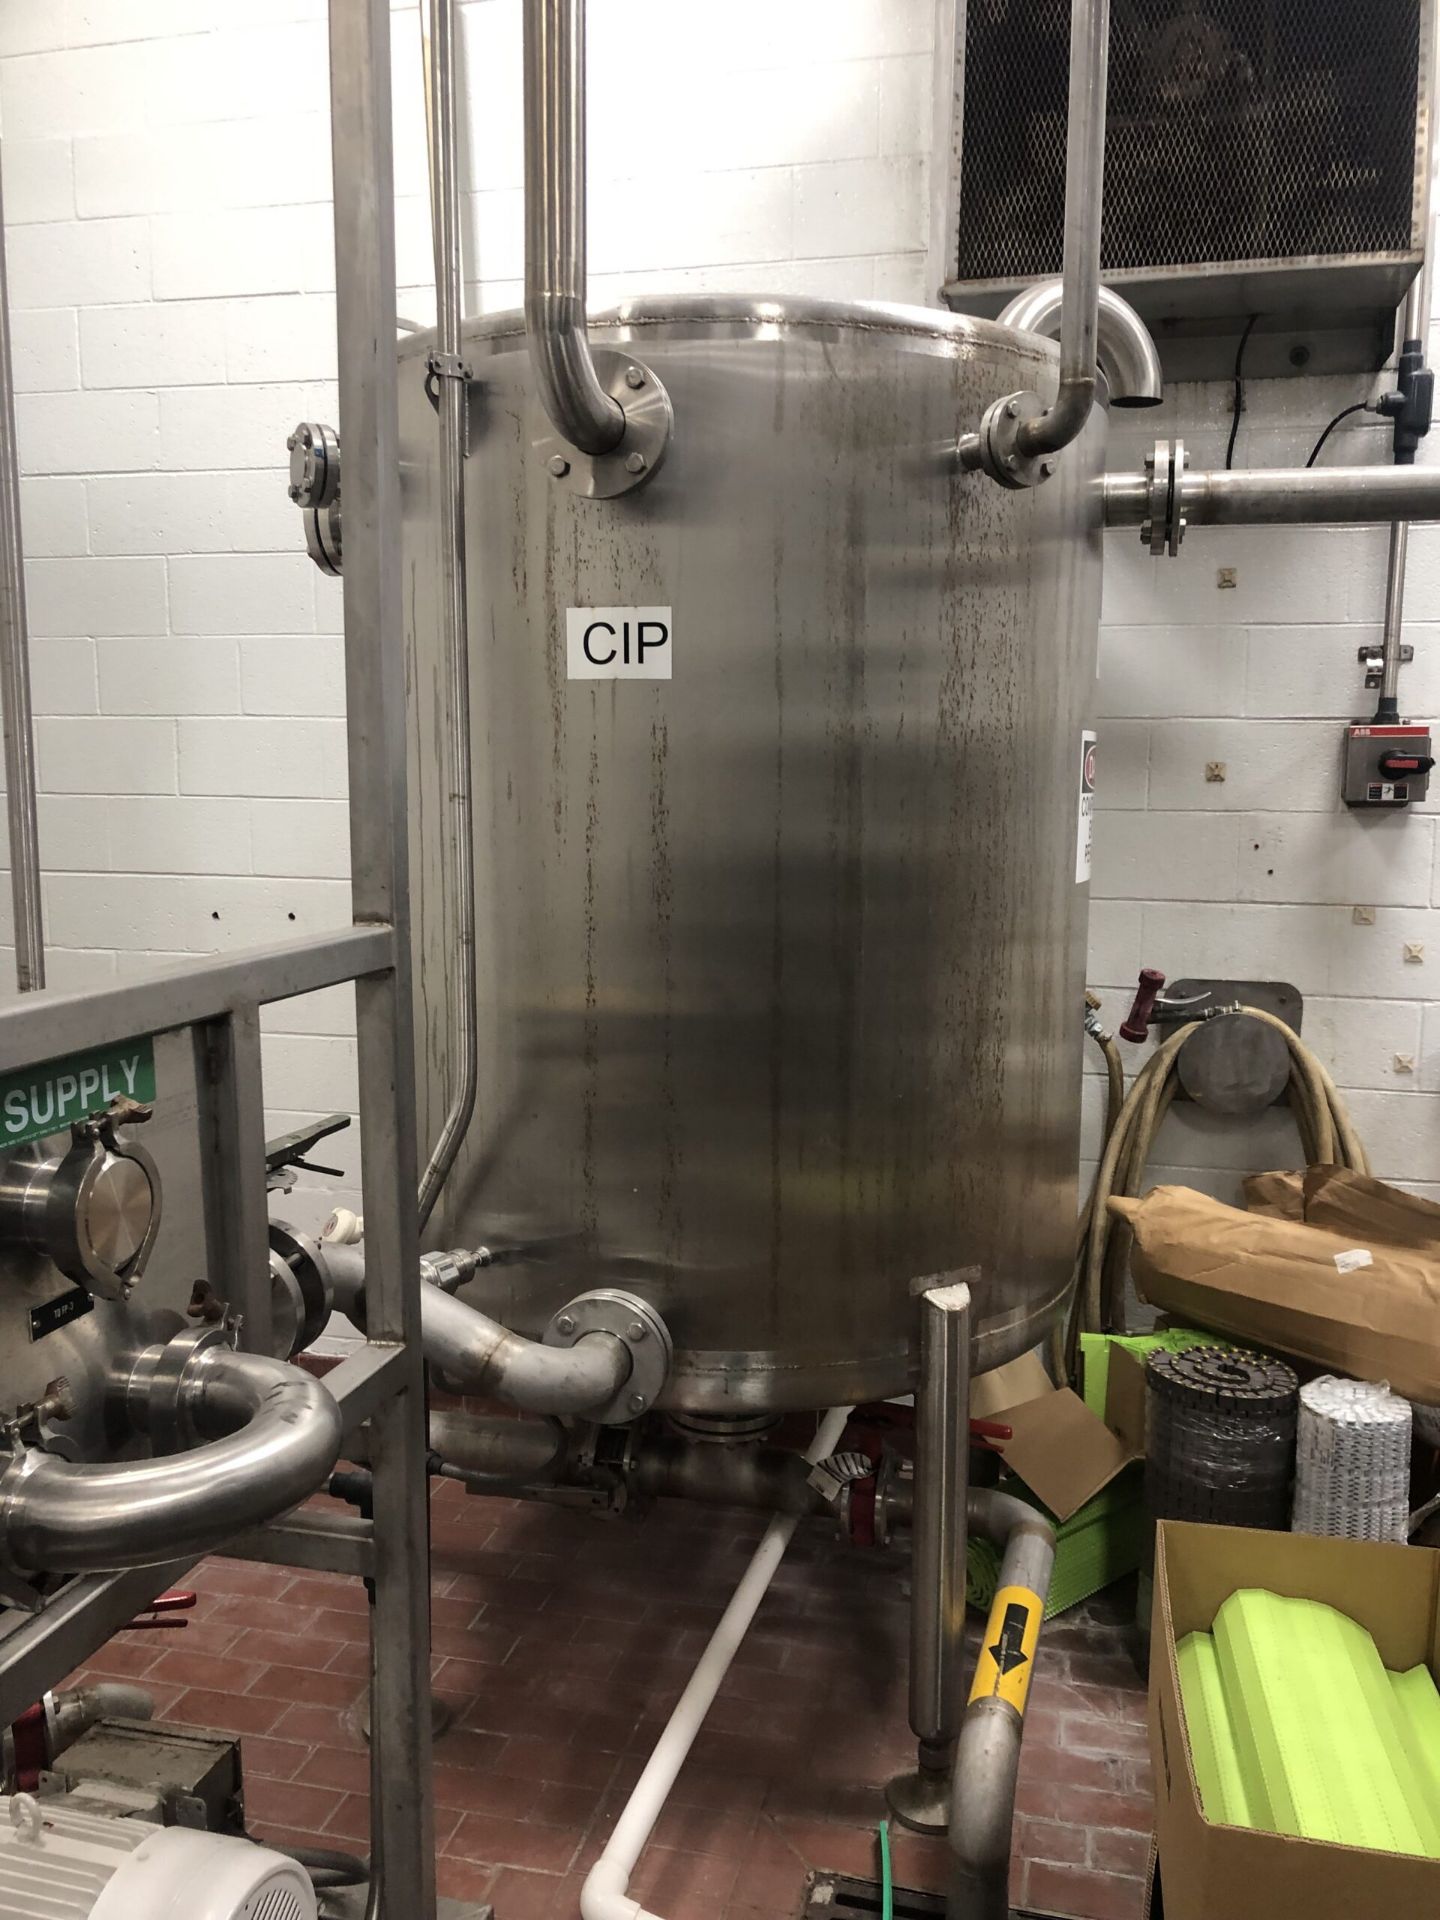 300 Gallon Stainless Steel CIP Tank for RO Skid - Image 2 of 2